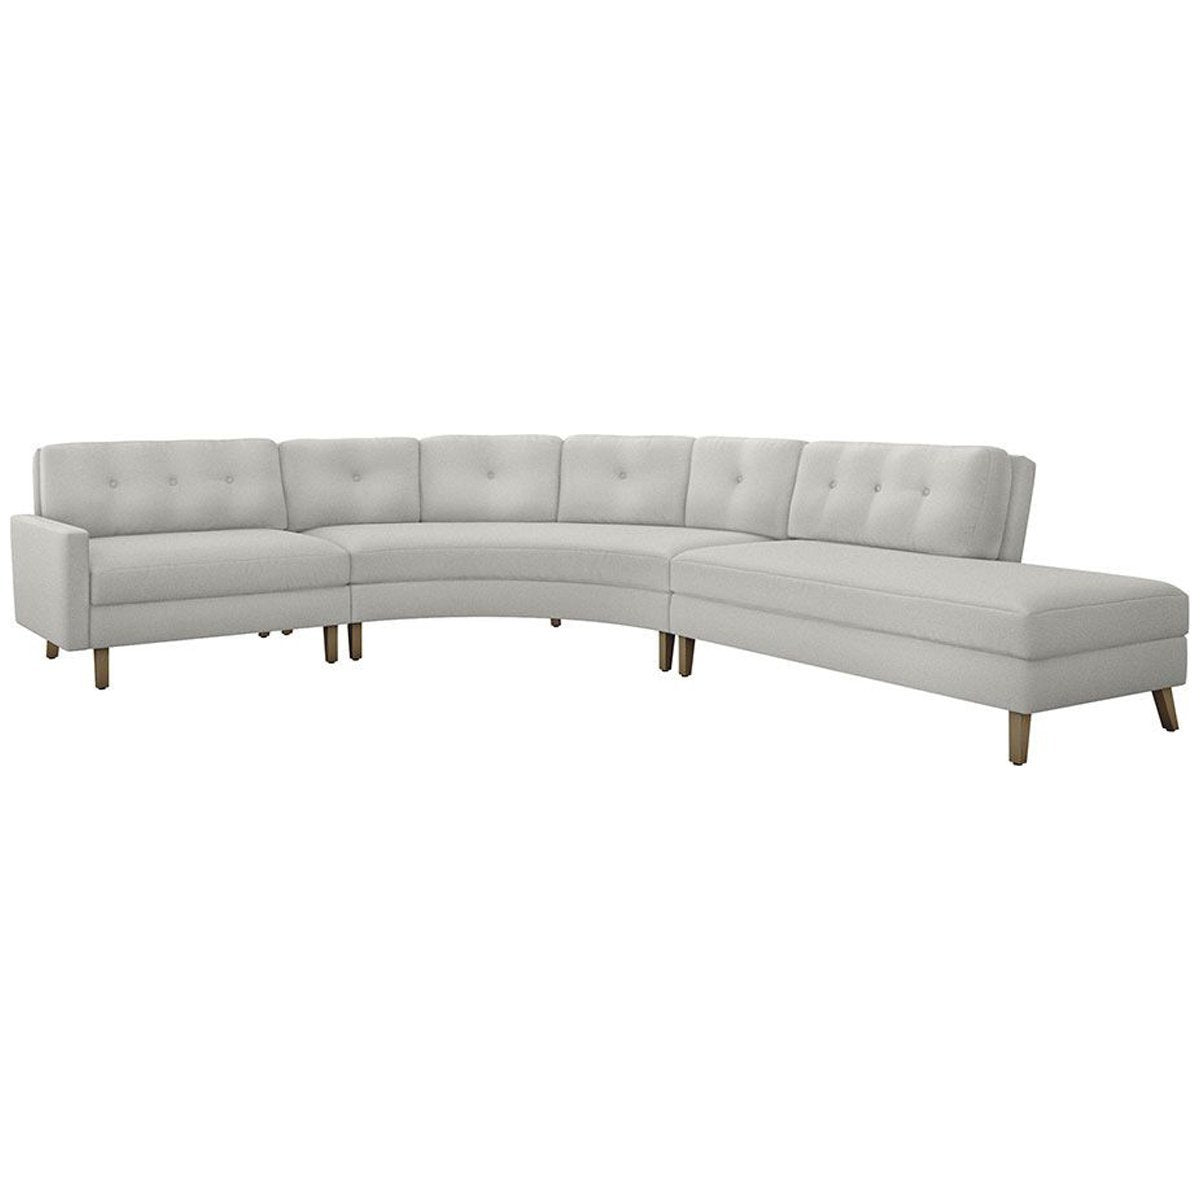 Interlude Home Aventura Chaise Sectional - Faux Linen